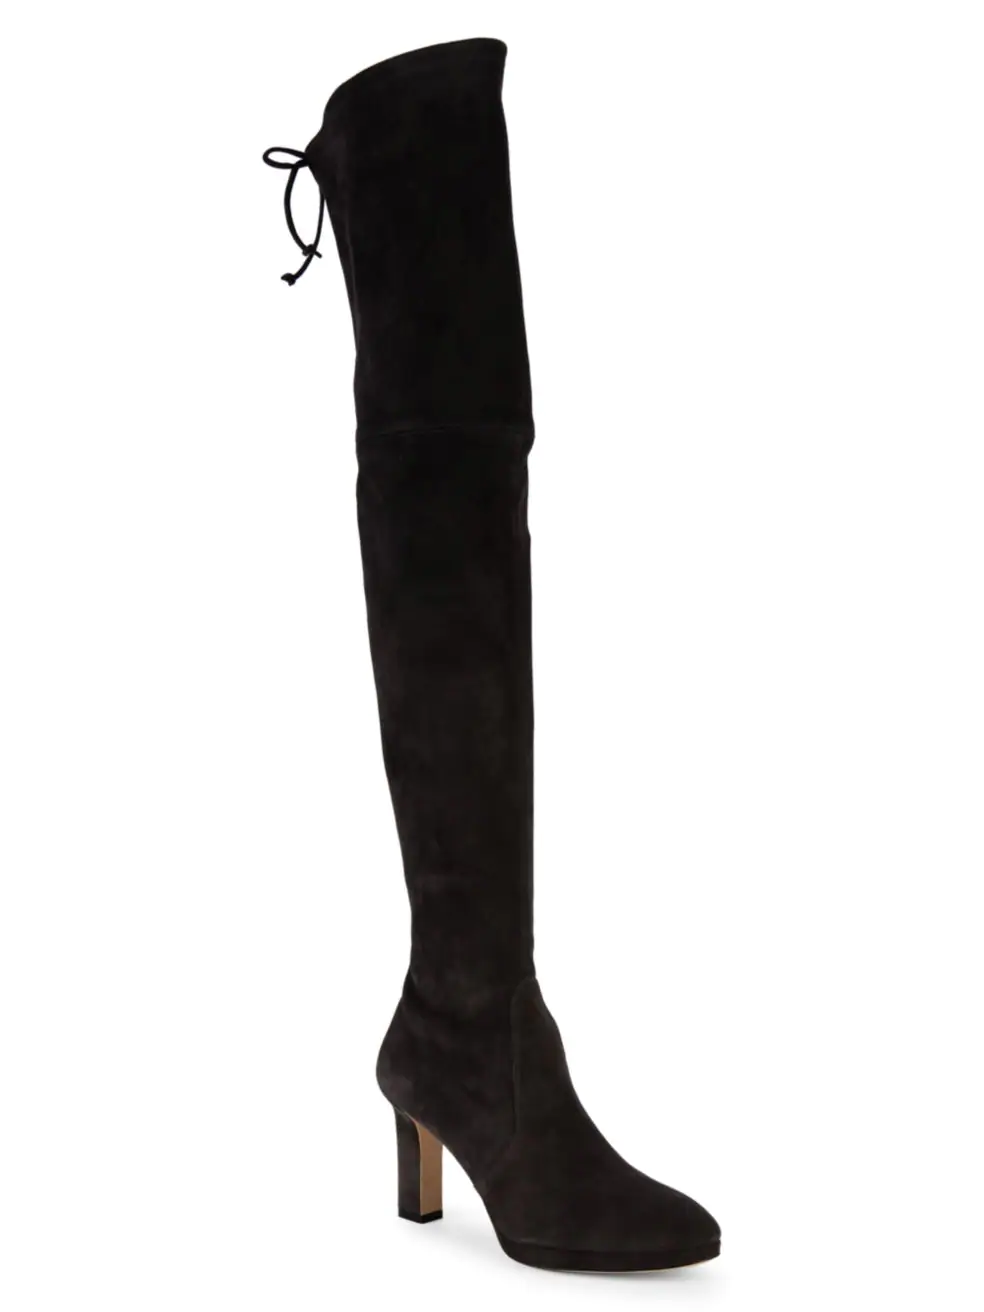 stuart weitzman boots on sale - Alley Girl - Fashion Style Tech and More